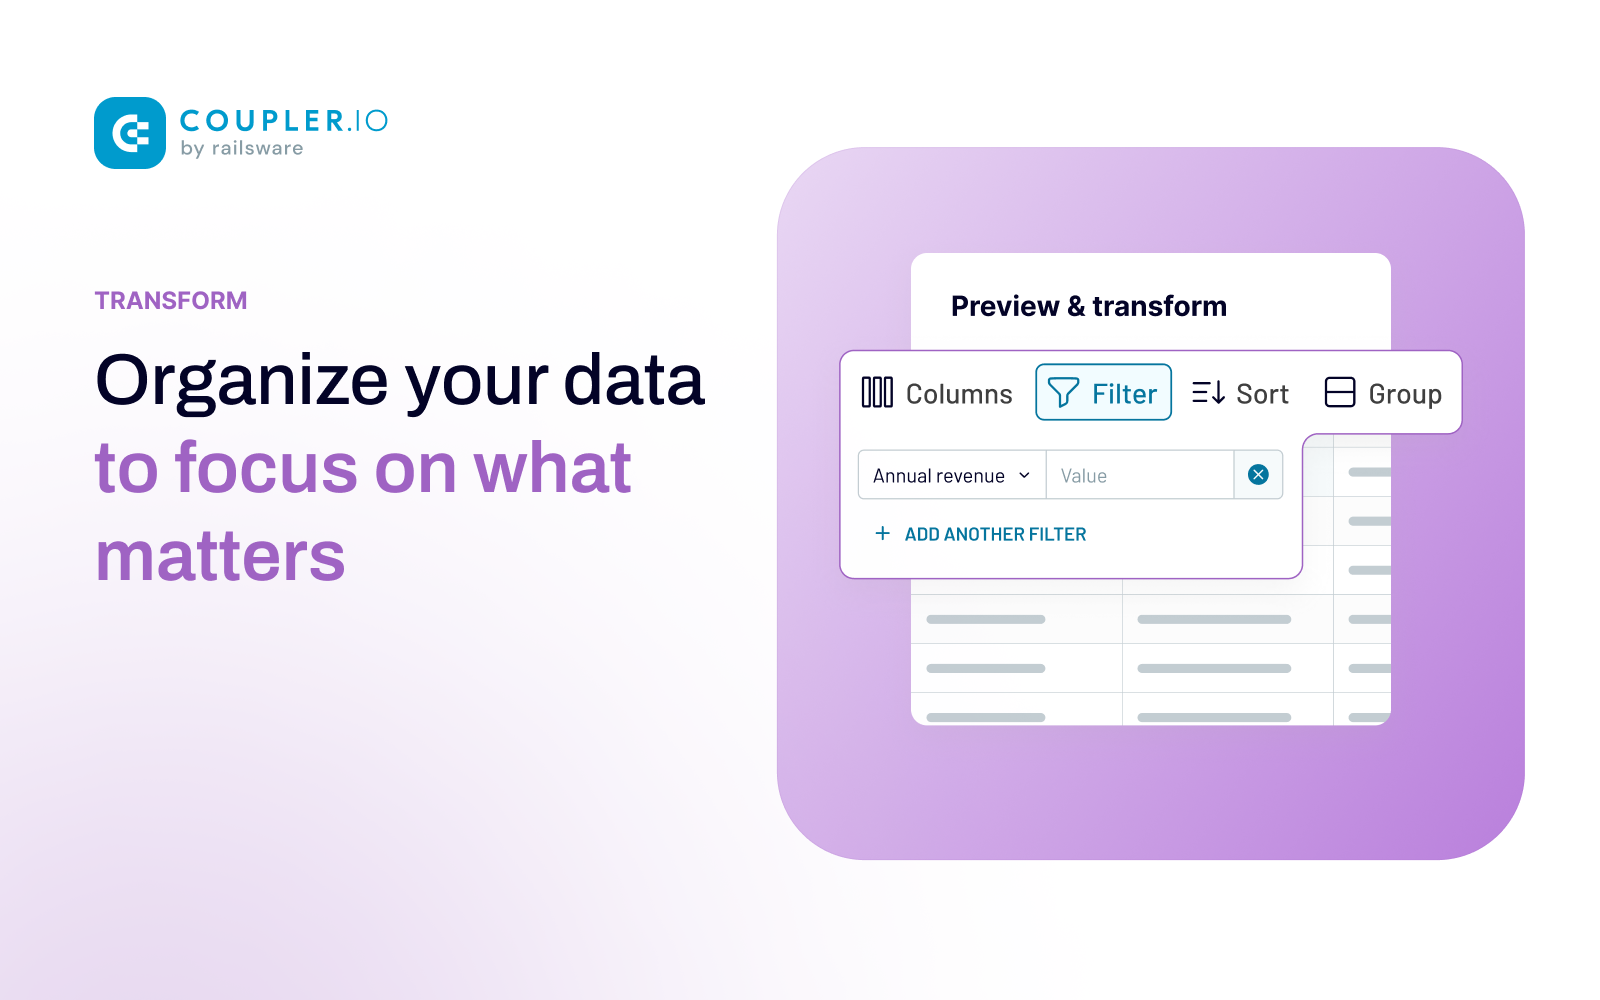 Organize your data to focus on what matters